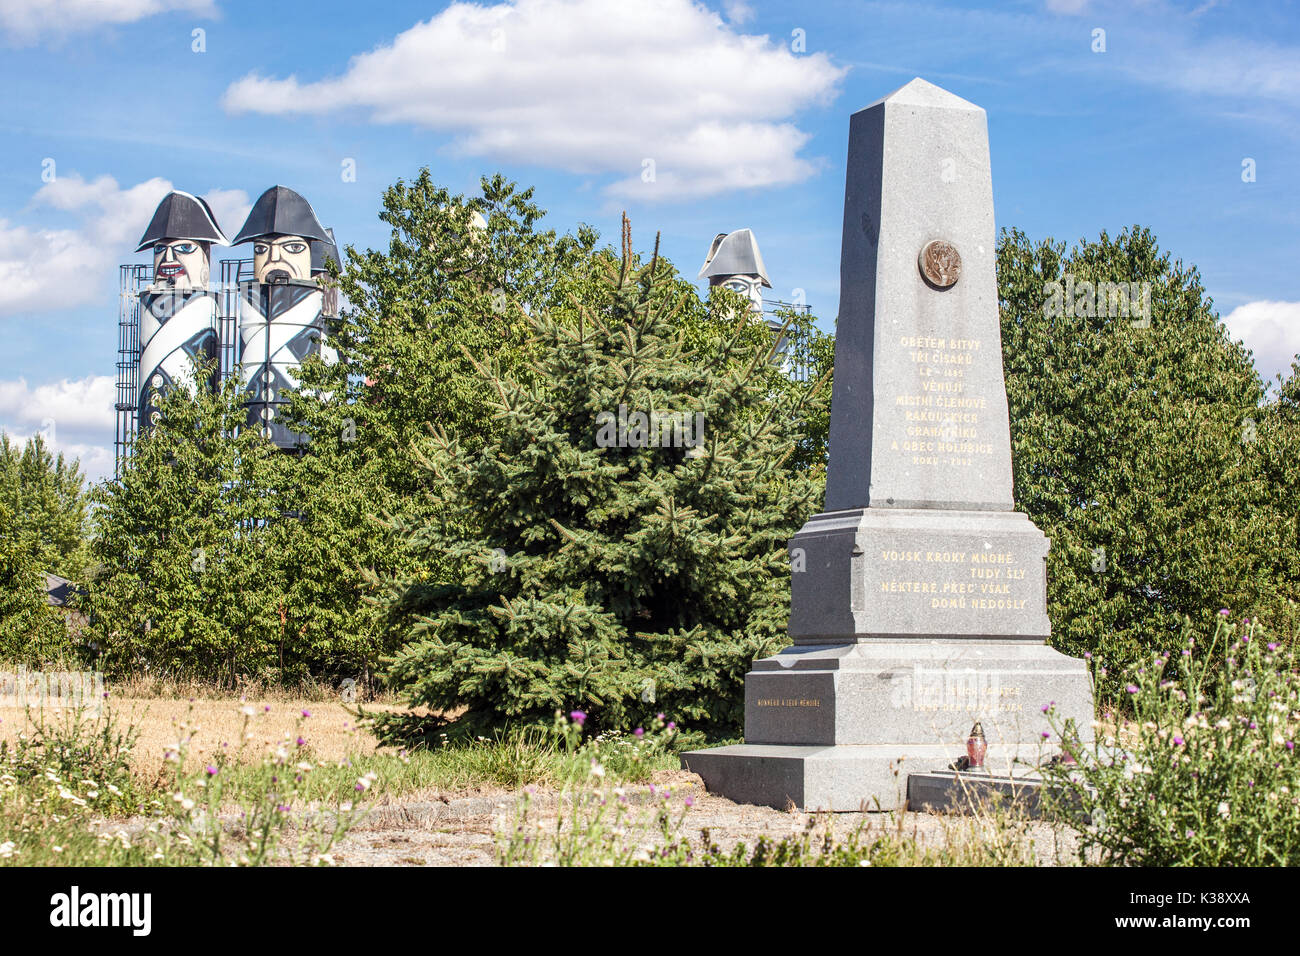 Austerlitz memorial battlefield near the town of Holubice reminds French troops with cannon, Moravia, Czech Republic Stock Photo